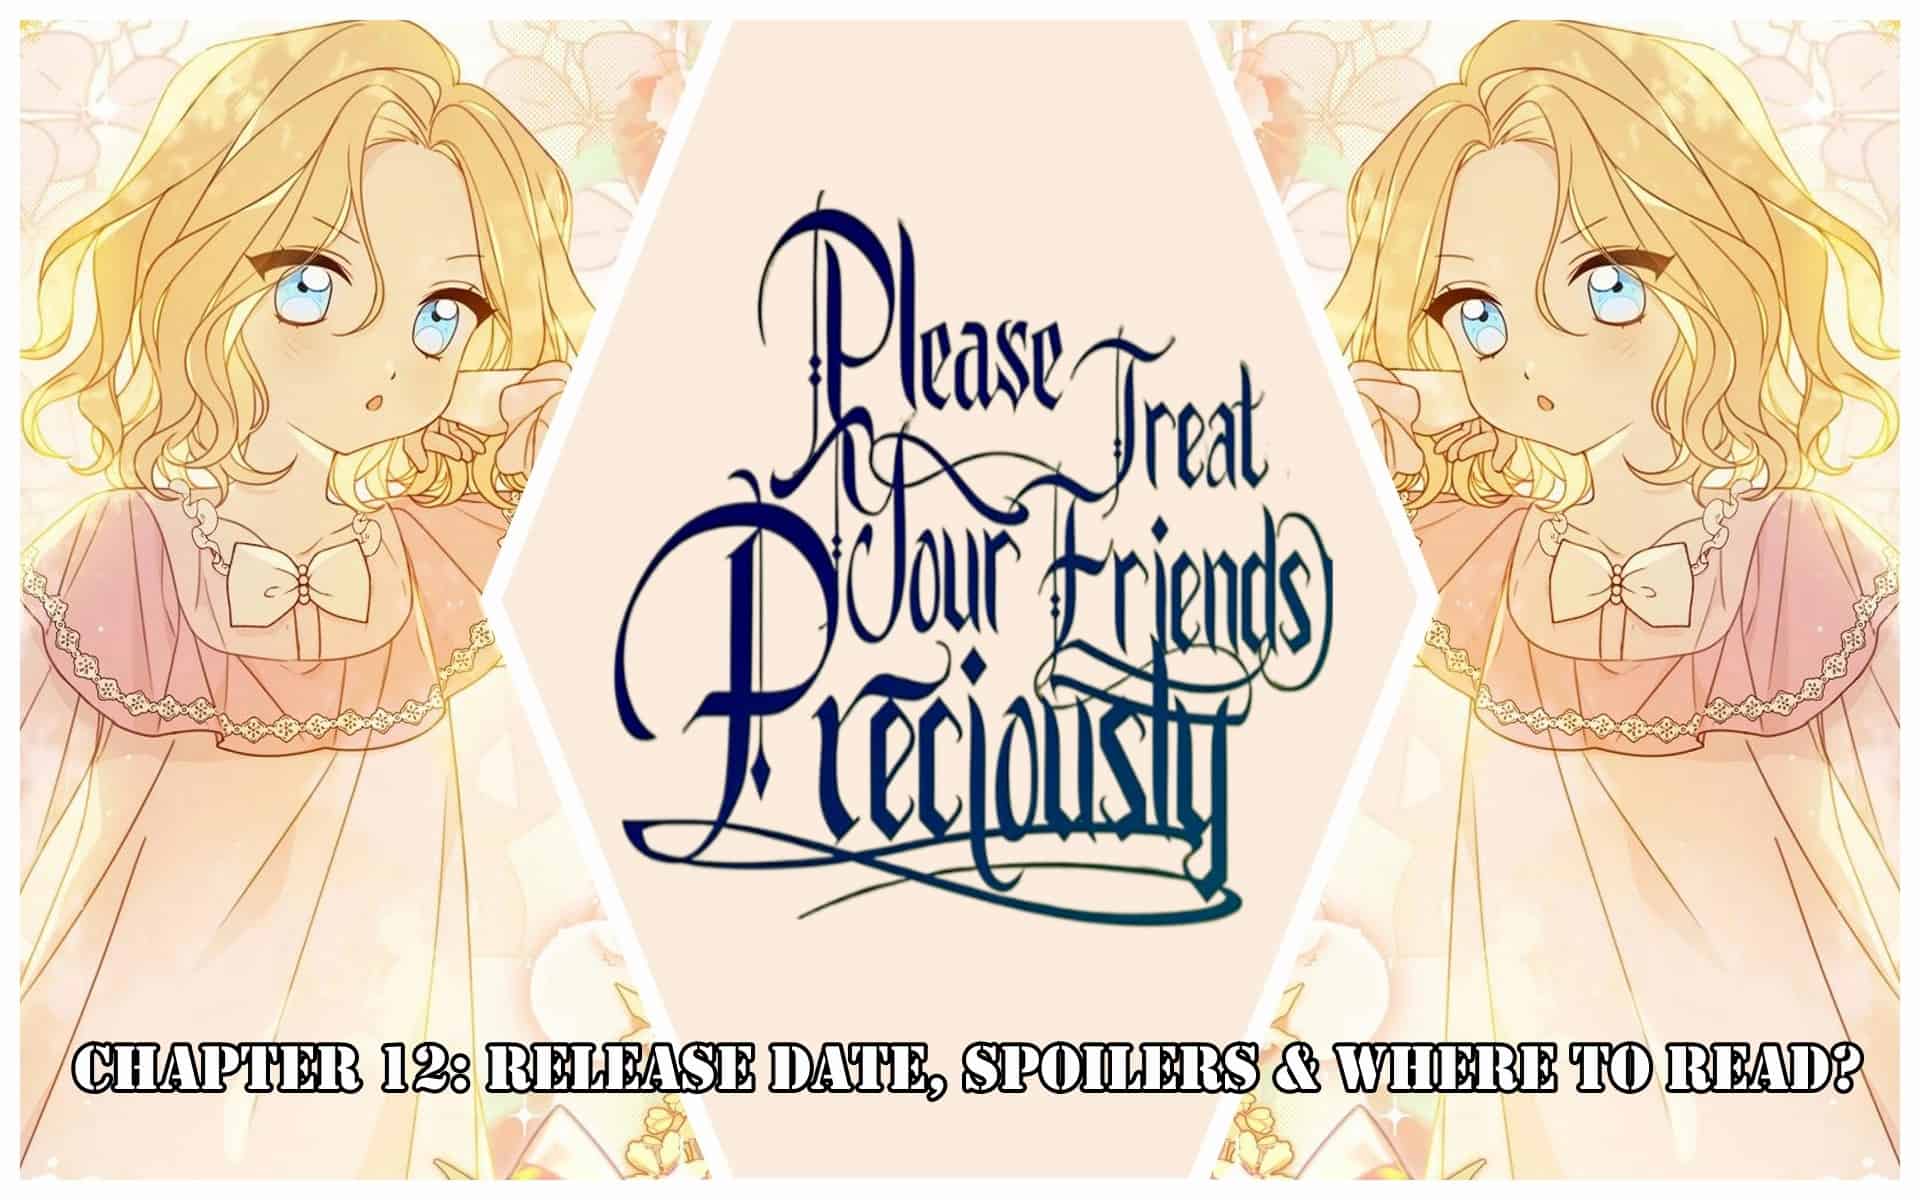 Please Treat Your Friends Preciously Chapter 12: Release Date, Spoilers & Where to Read?